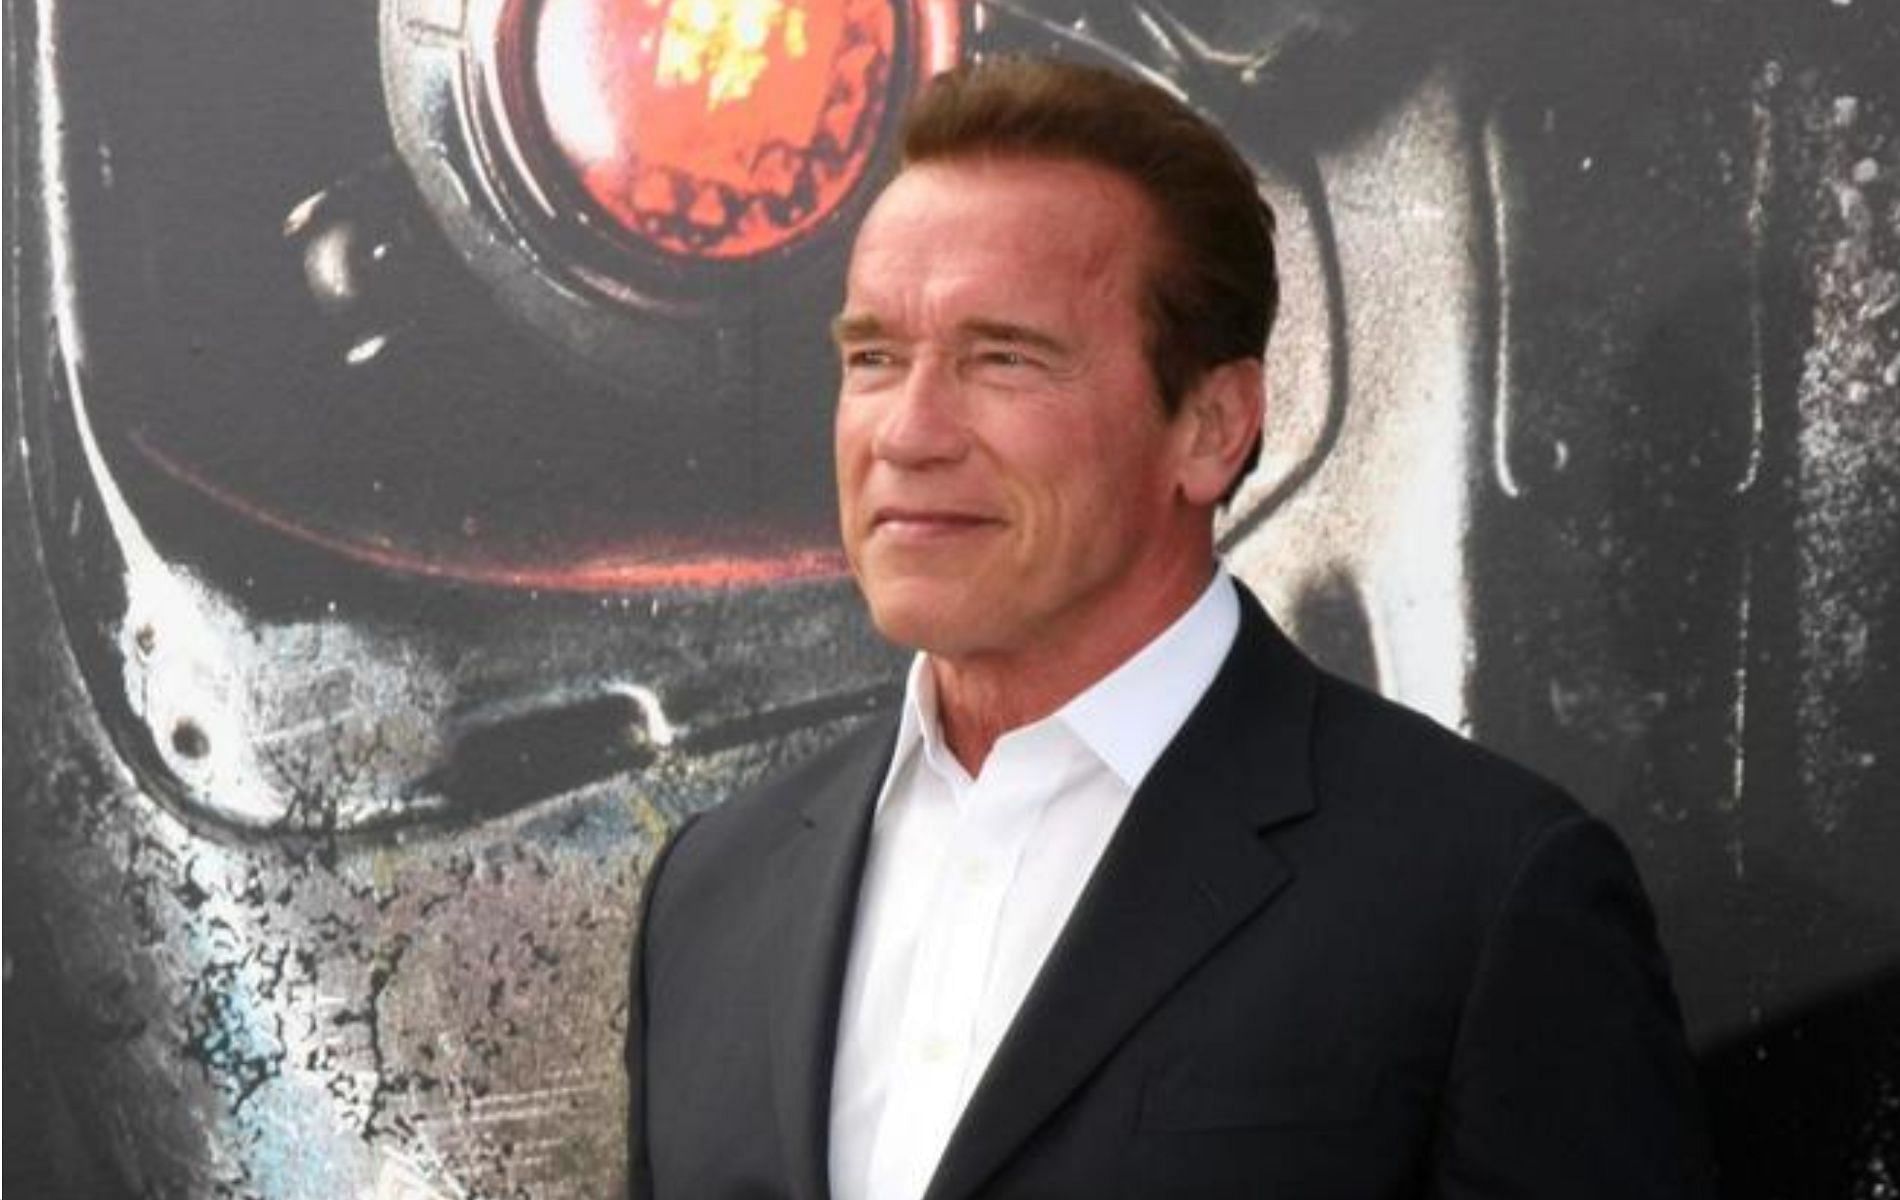 Arnold Schwarzenegger opens up about difficult recovery post third open heart surgery. (Image via Vecteezy)